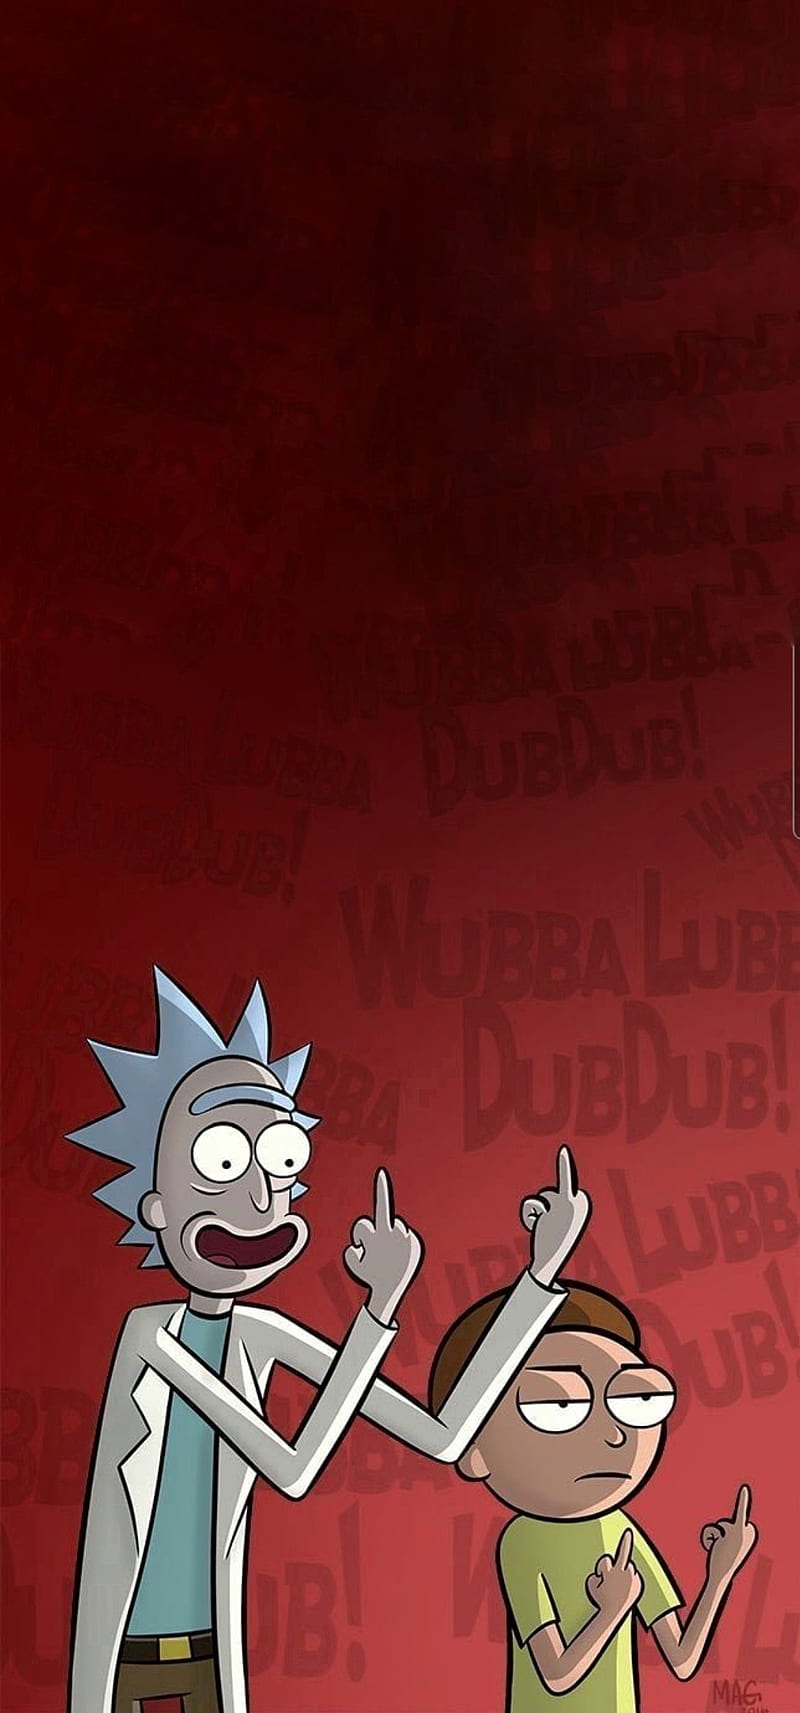 Free Rick and Morty Image Collection